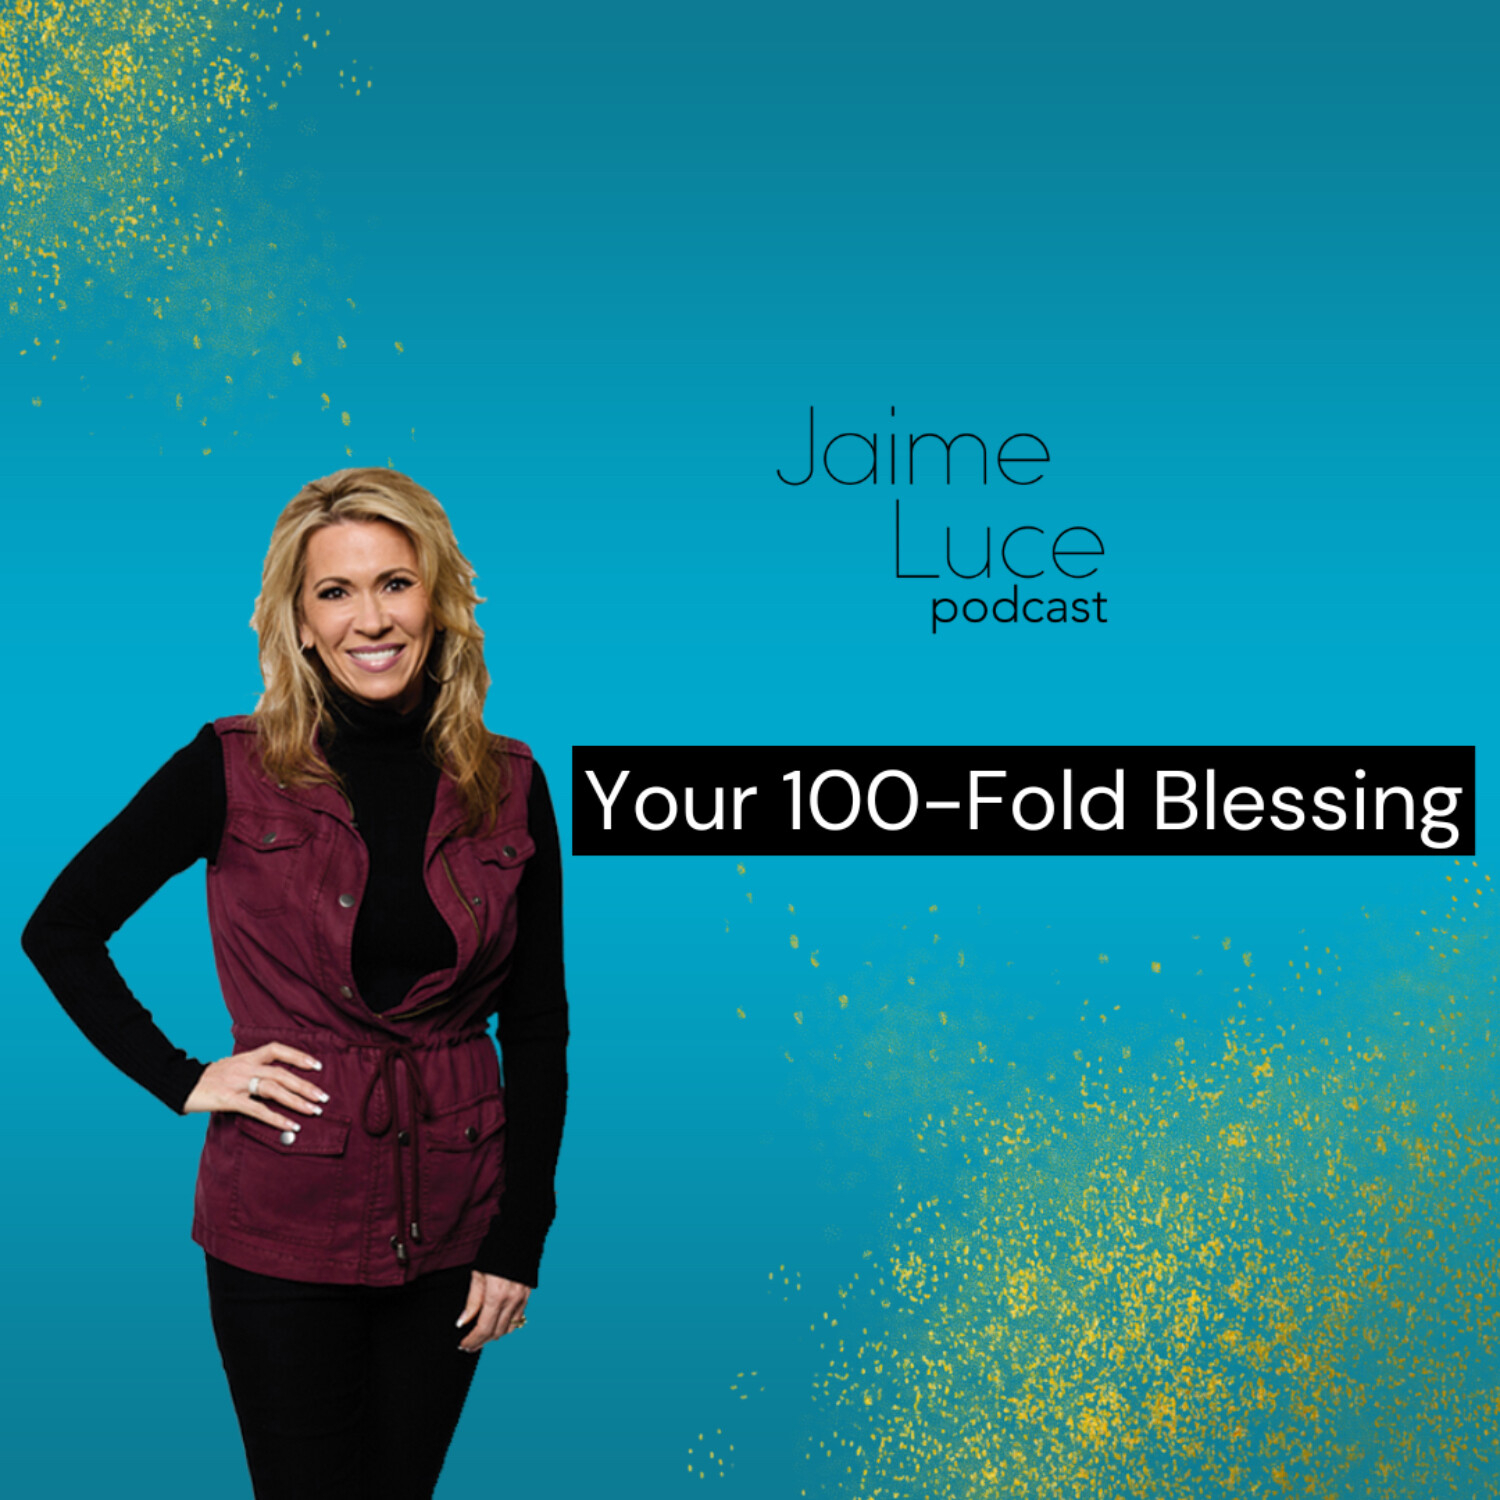 Your 100-Fold Blessing